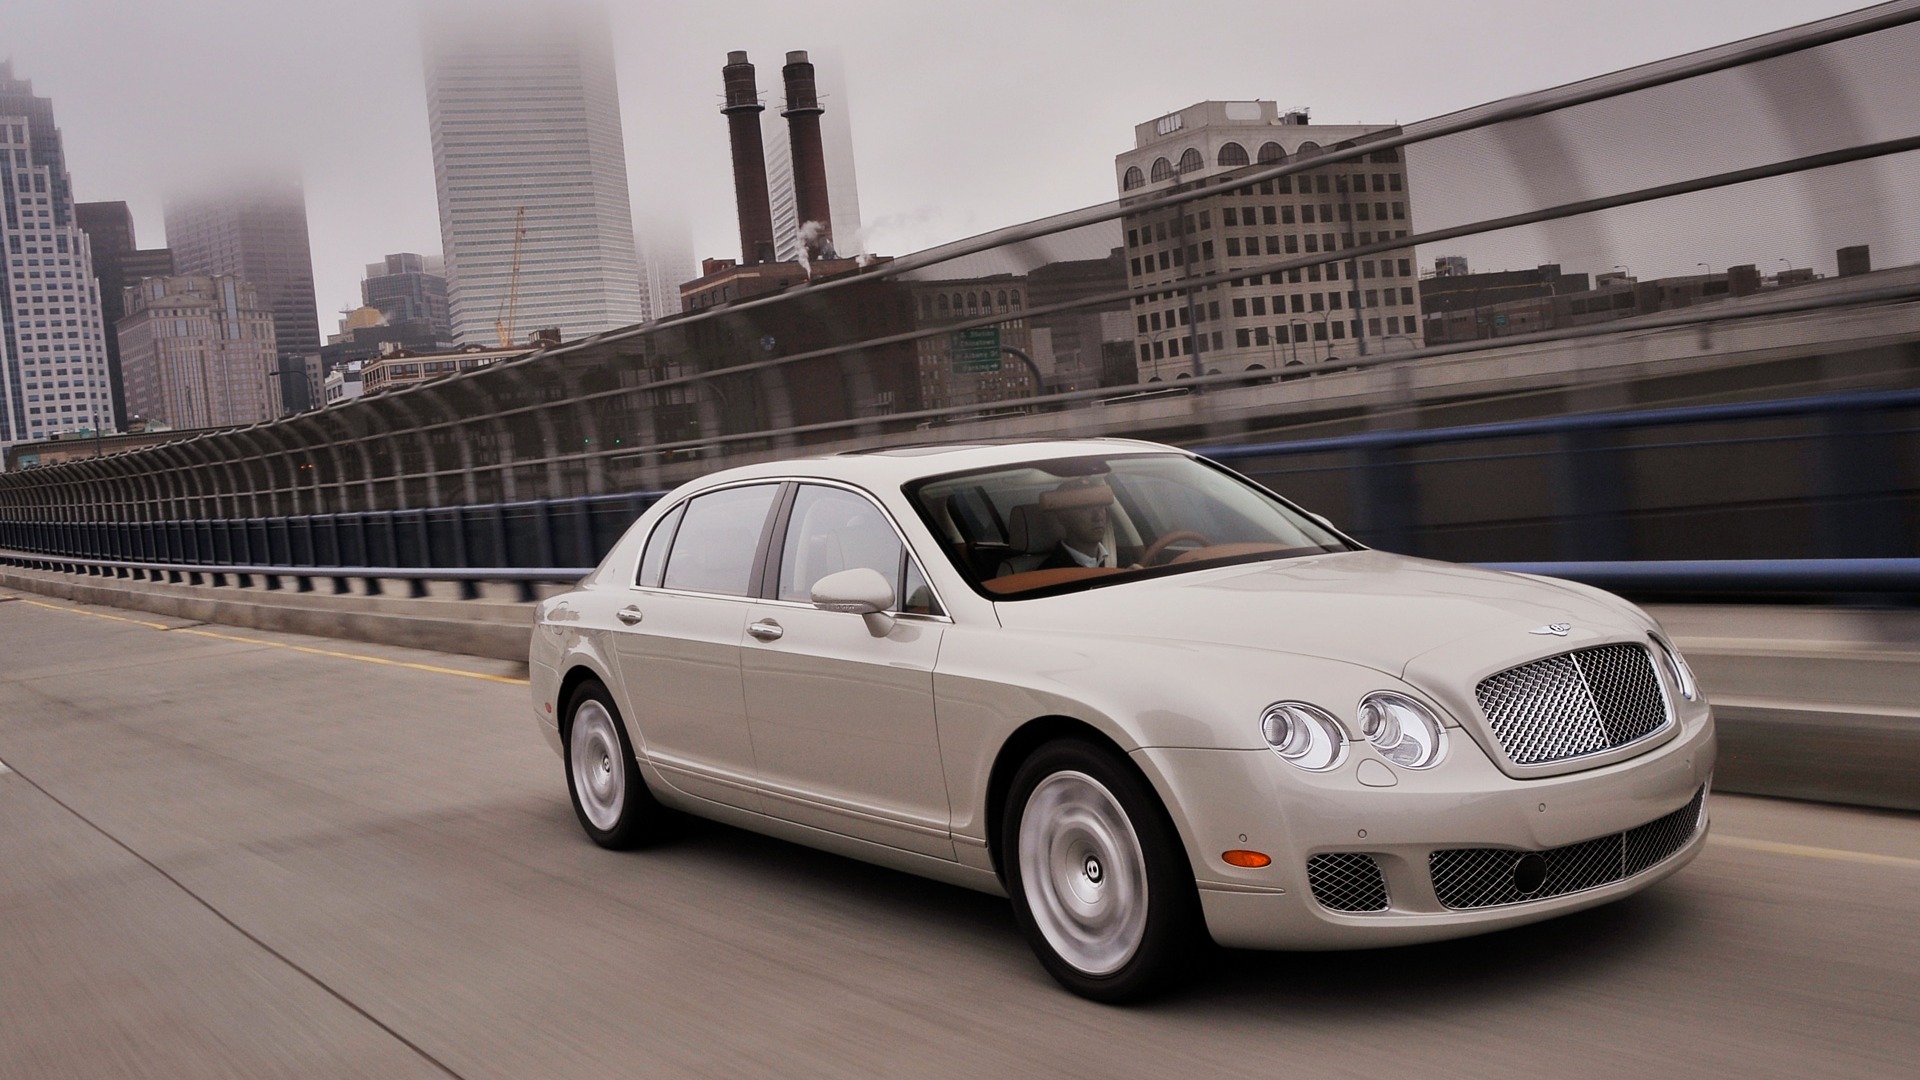 Bentley Continental Flying Spur - 2008 宾利2 - 1920x1080